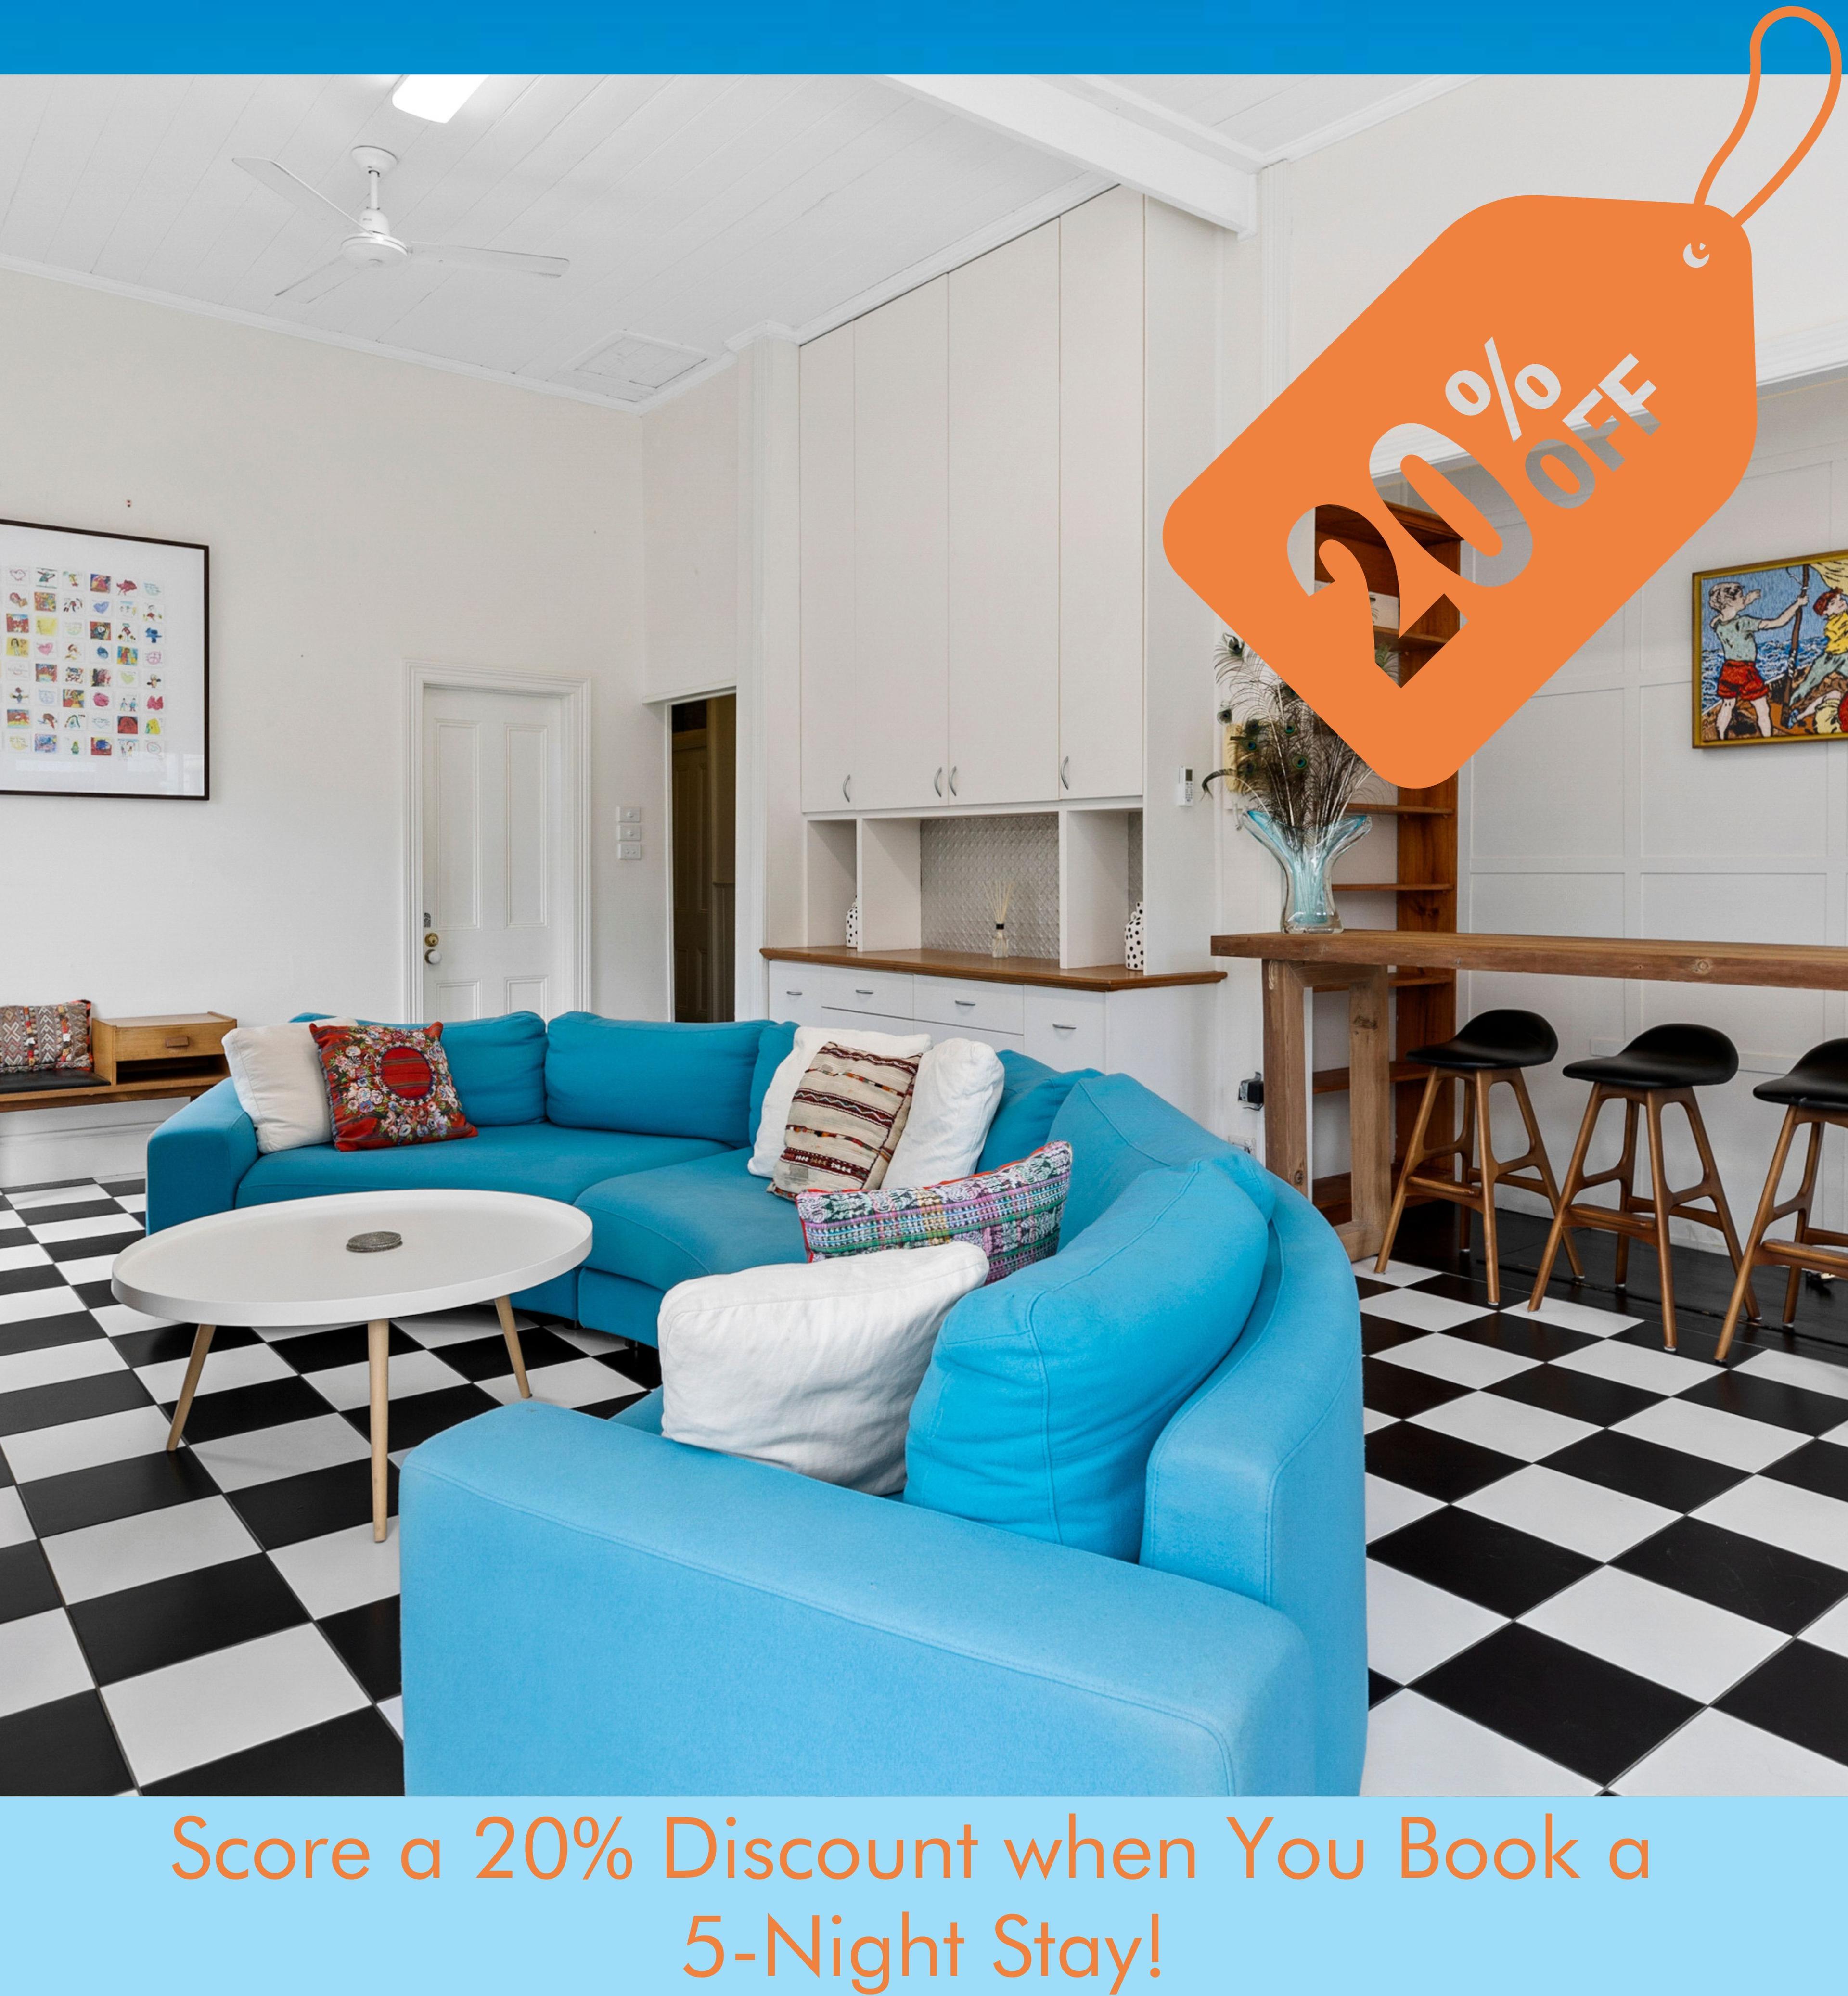 Scoop up a sweet 20% discount on a 5-night stay!